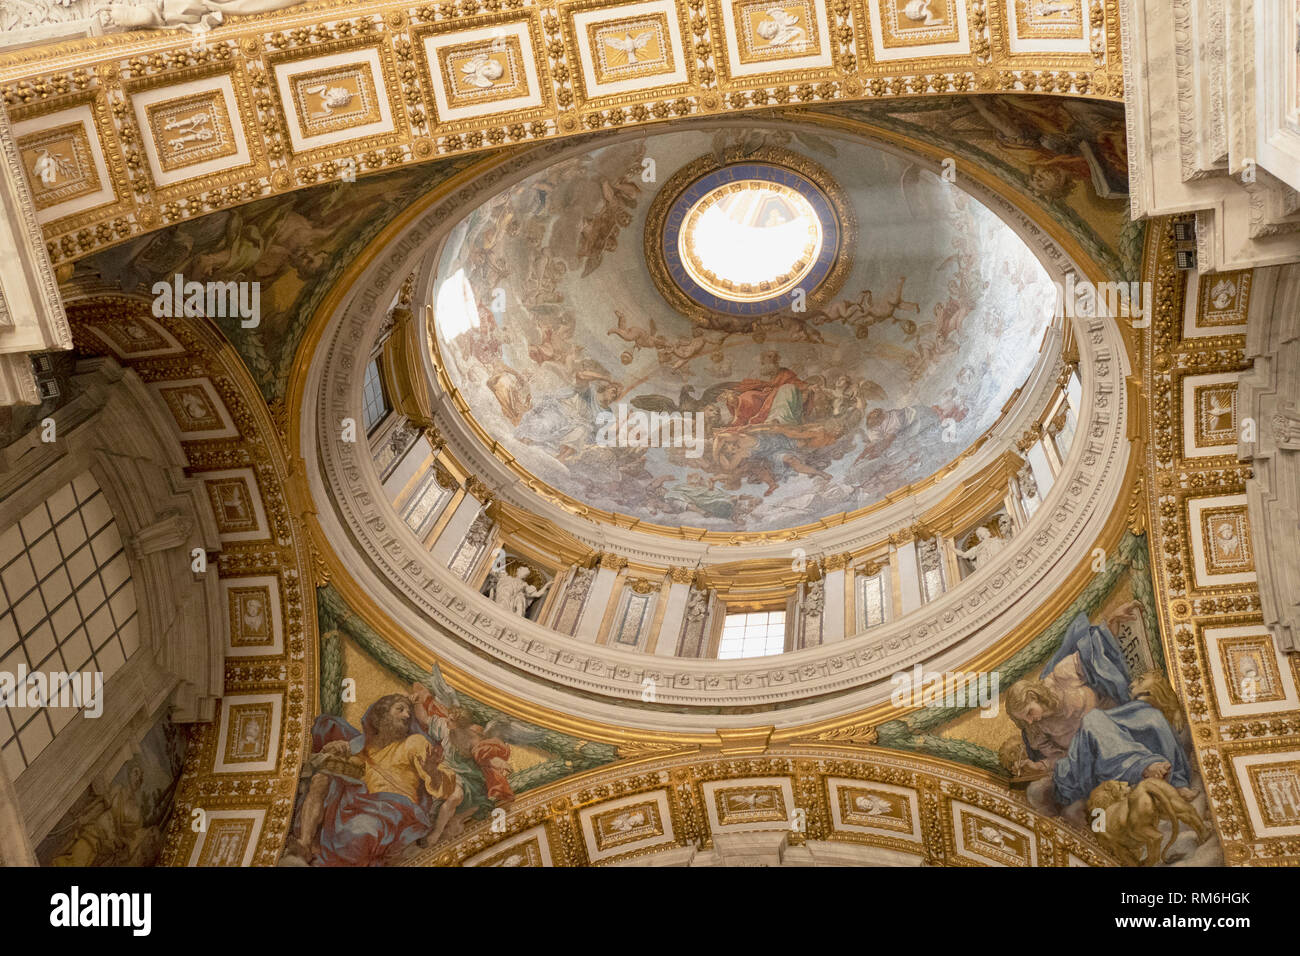 Architectural details of the dome at St. Peter's Basilica, San Pietro in Vaticano, Papal Basilica of St. Peter in the Vatican, Rome, Italy Stock Photo